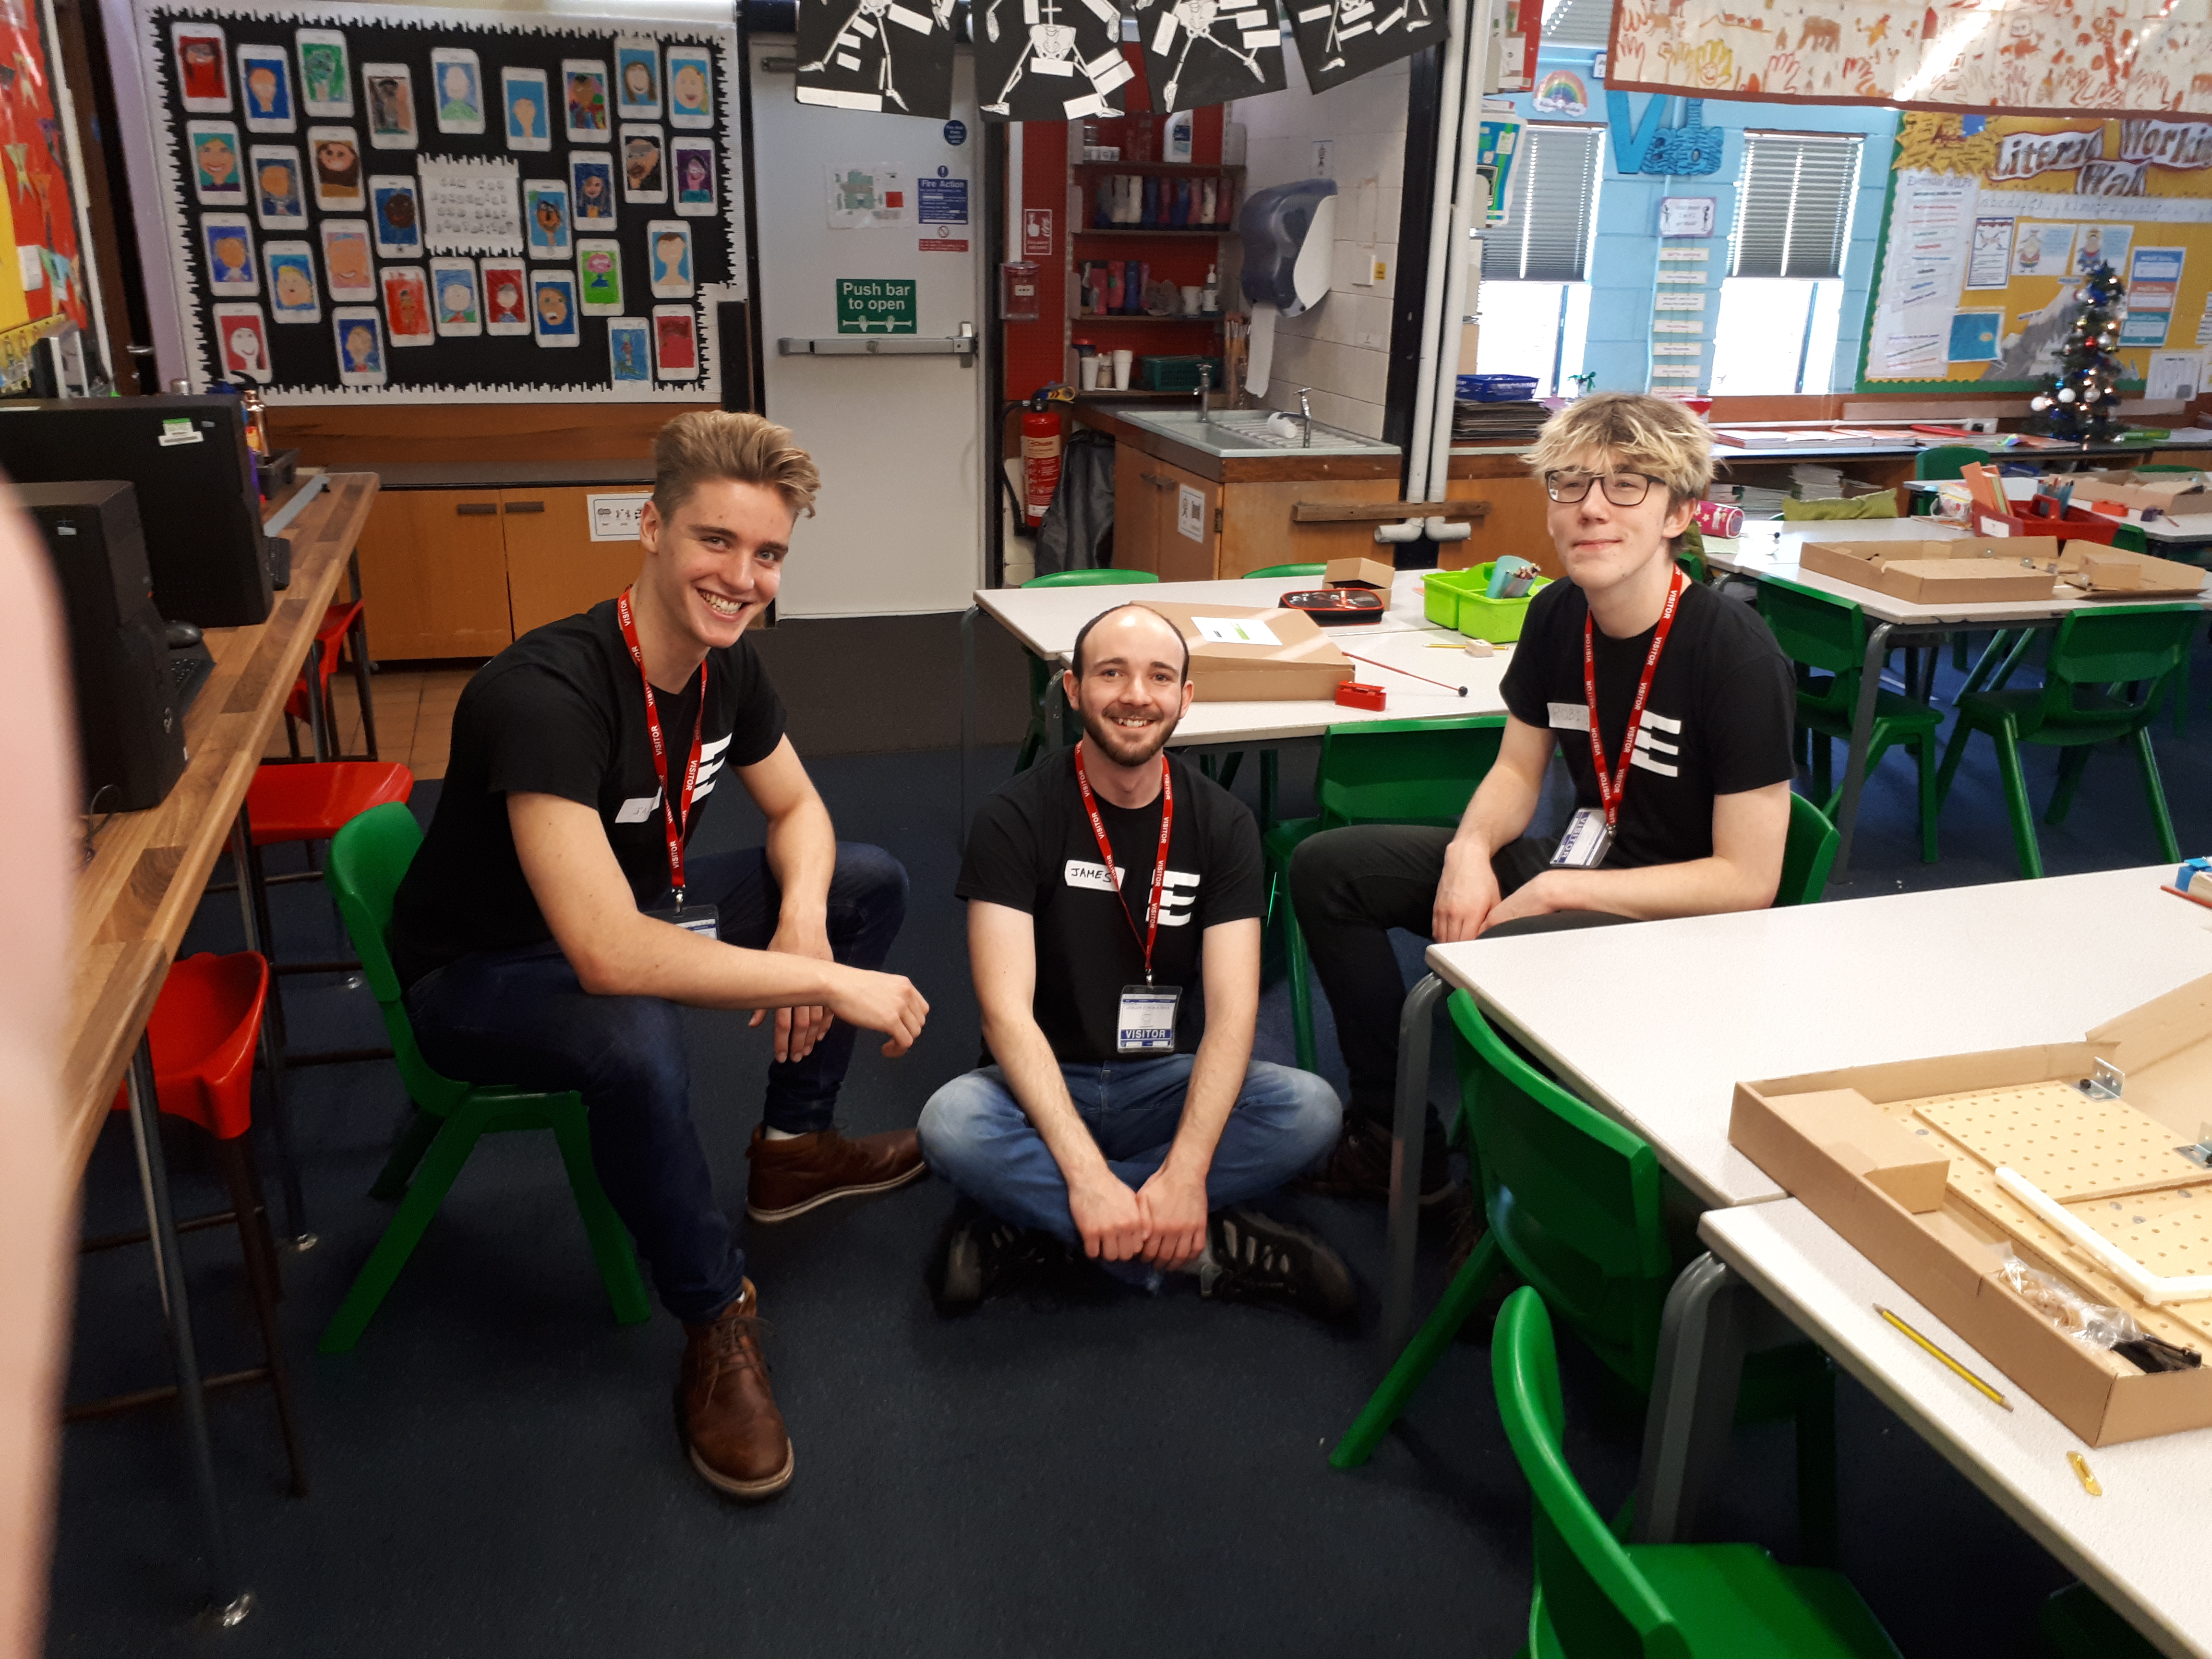 Some of the engineers taking part in the classroom visits as part of the 88 Pianists project - Three of the engineers taking part in the classroom visits as part of the 88 Pianists project are pictured in a Sheffield classroom.